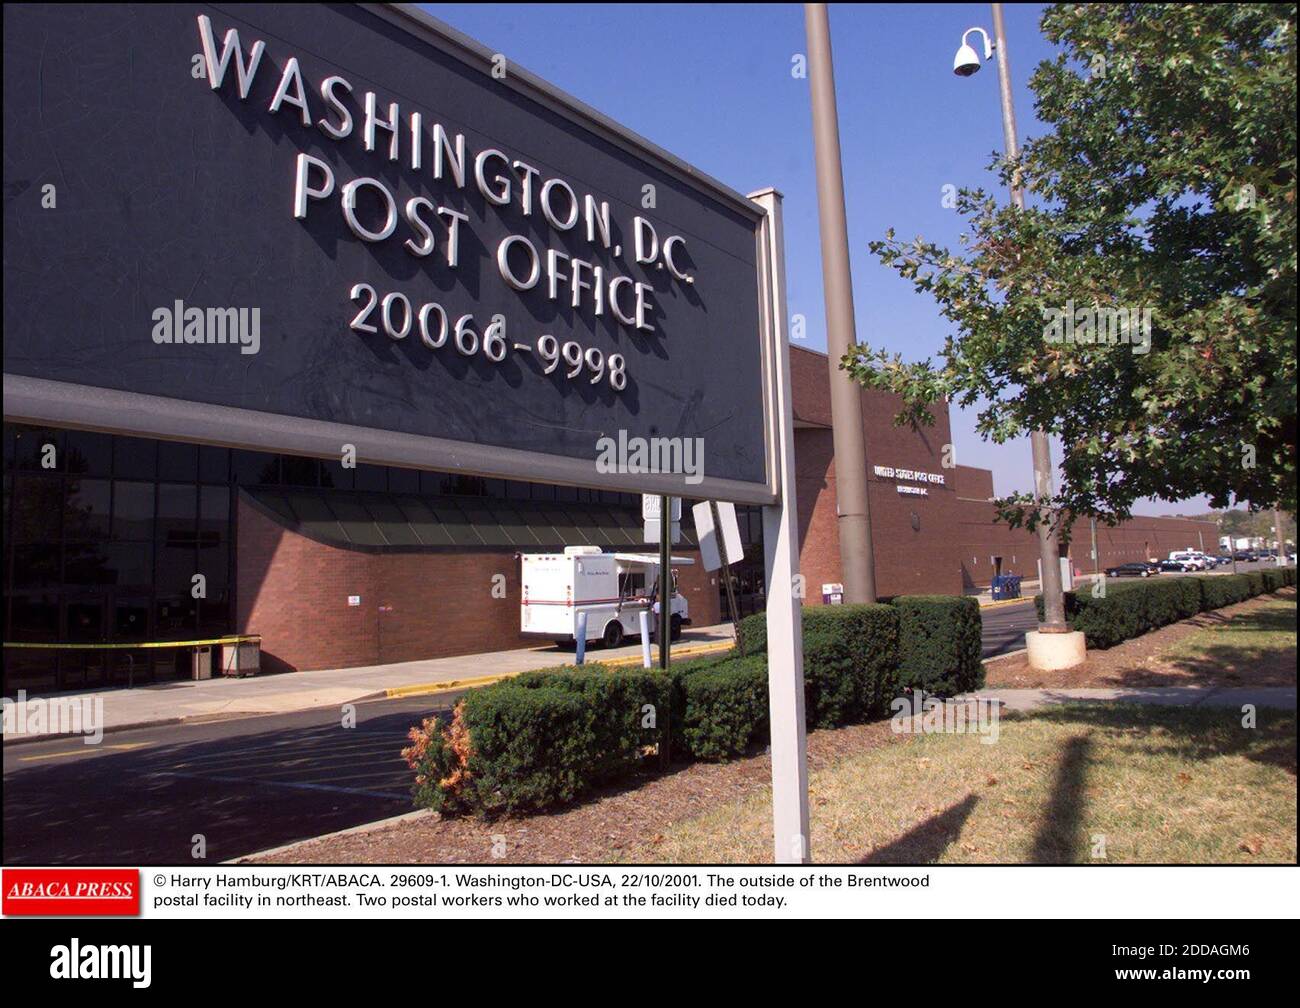 NO FILM, NO VIDEO, NO TV, NO DOCUMENTARY - © Harry Hamburg/KRT/ABACA. 29609-1. Washington-DC-USA, 22/10/2001. The outside of the Brentwood postal facility in northeast. Two postal workers who worked at the facility died today. Stock Photo